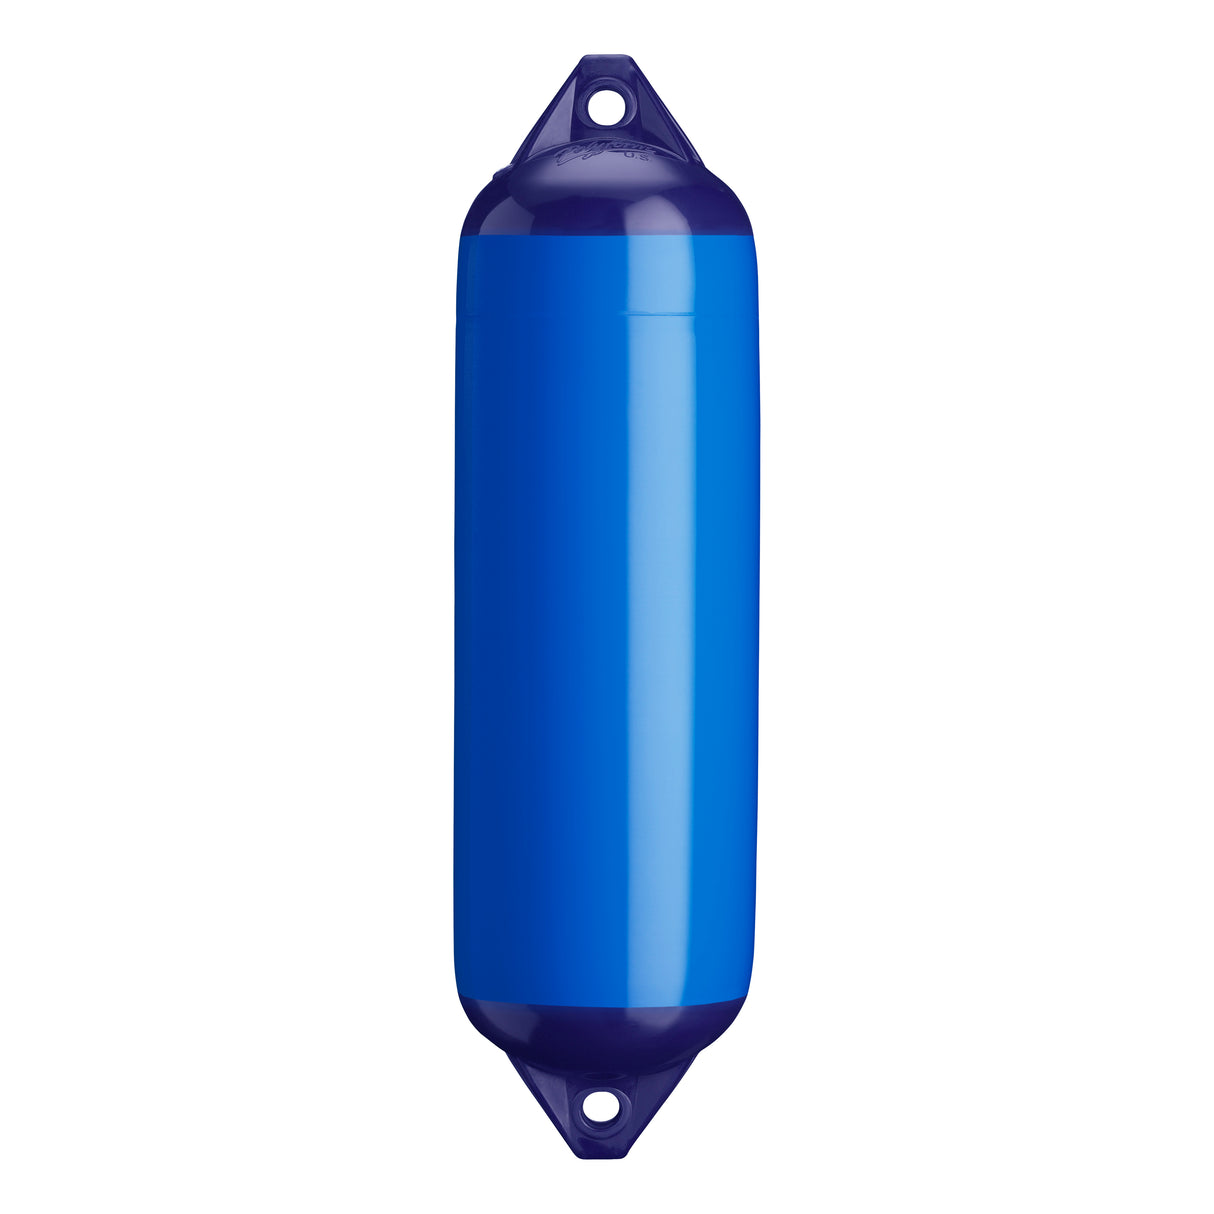 Blue boat fender with Navy-Top, Polyform F-3 